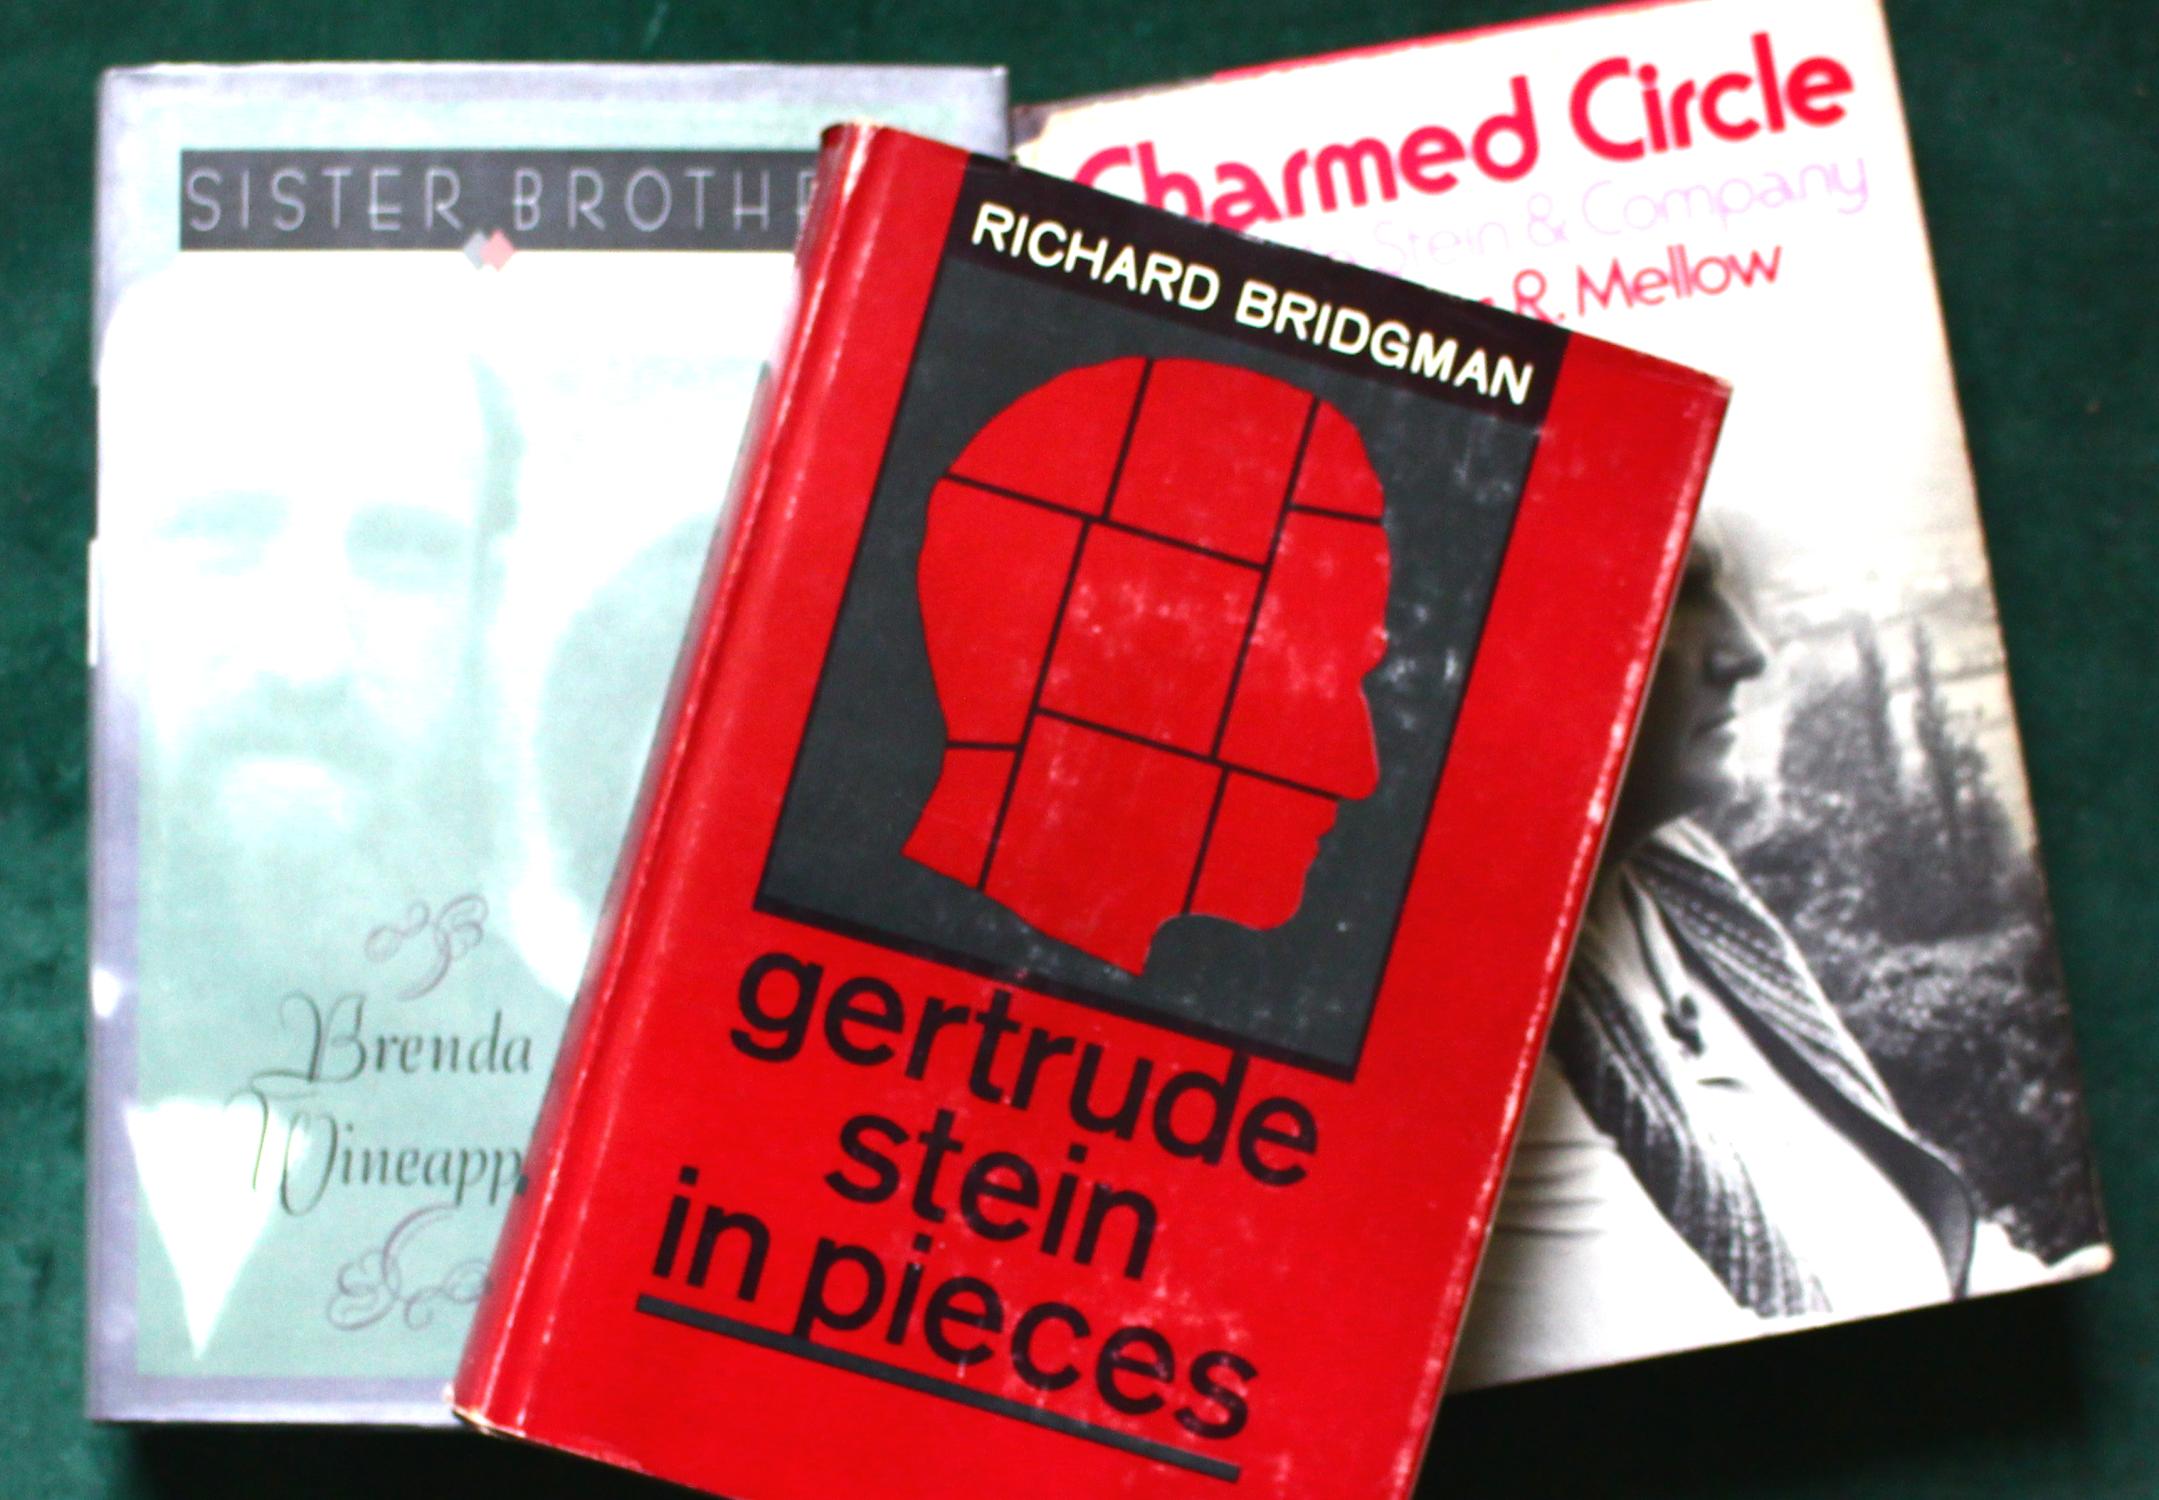 Collection of 10 works by or about Gertrude Stein and Alice B Toklas - Stein, Gertrude and Toklas, Alice B